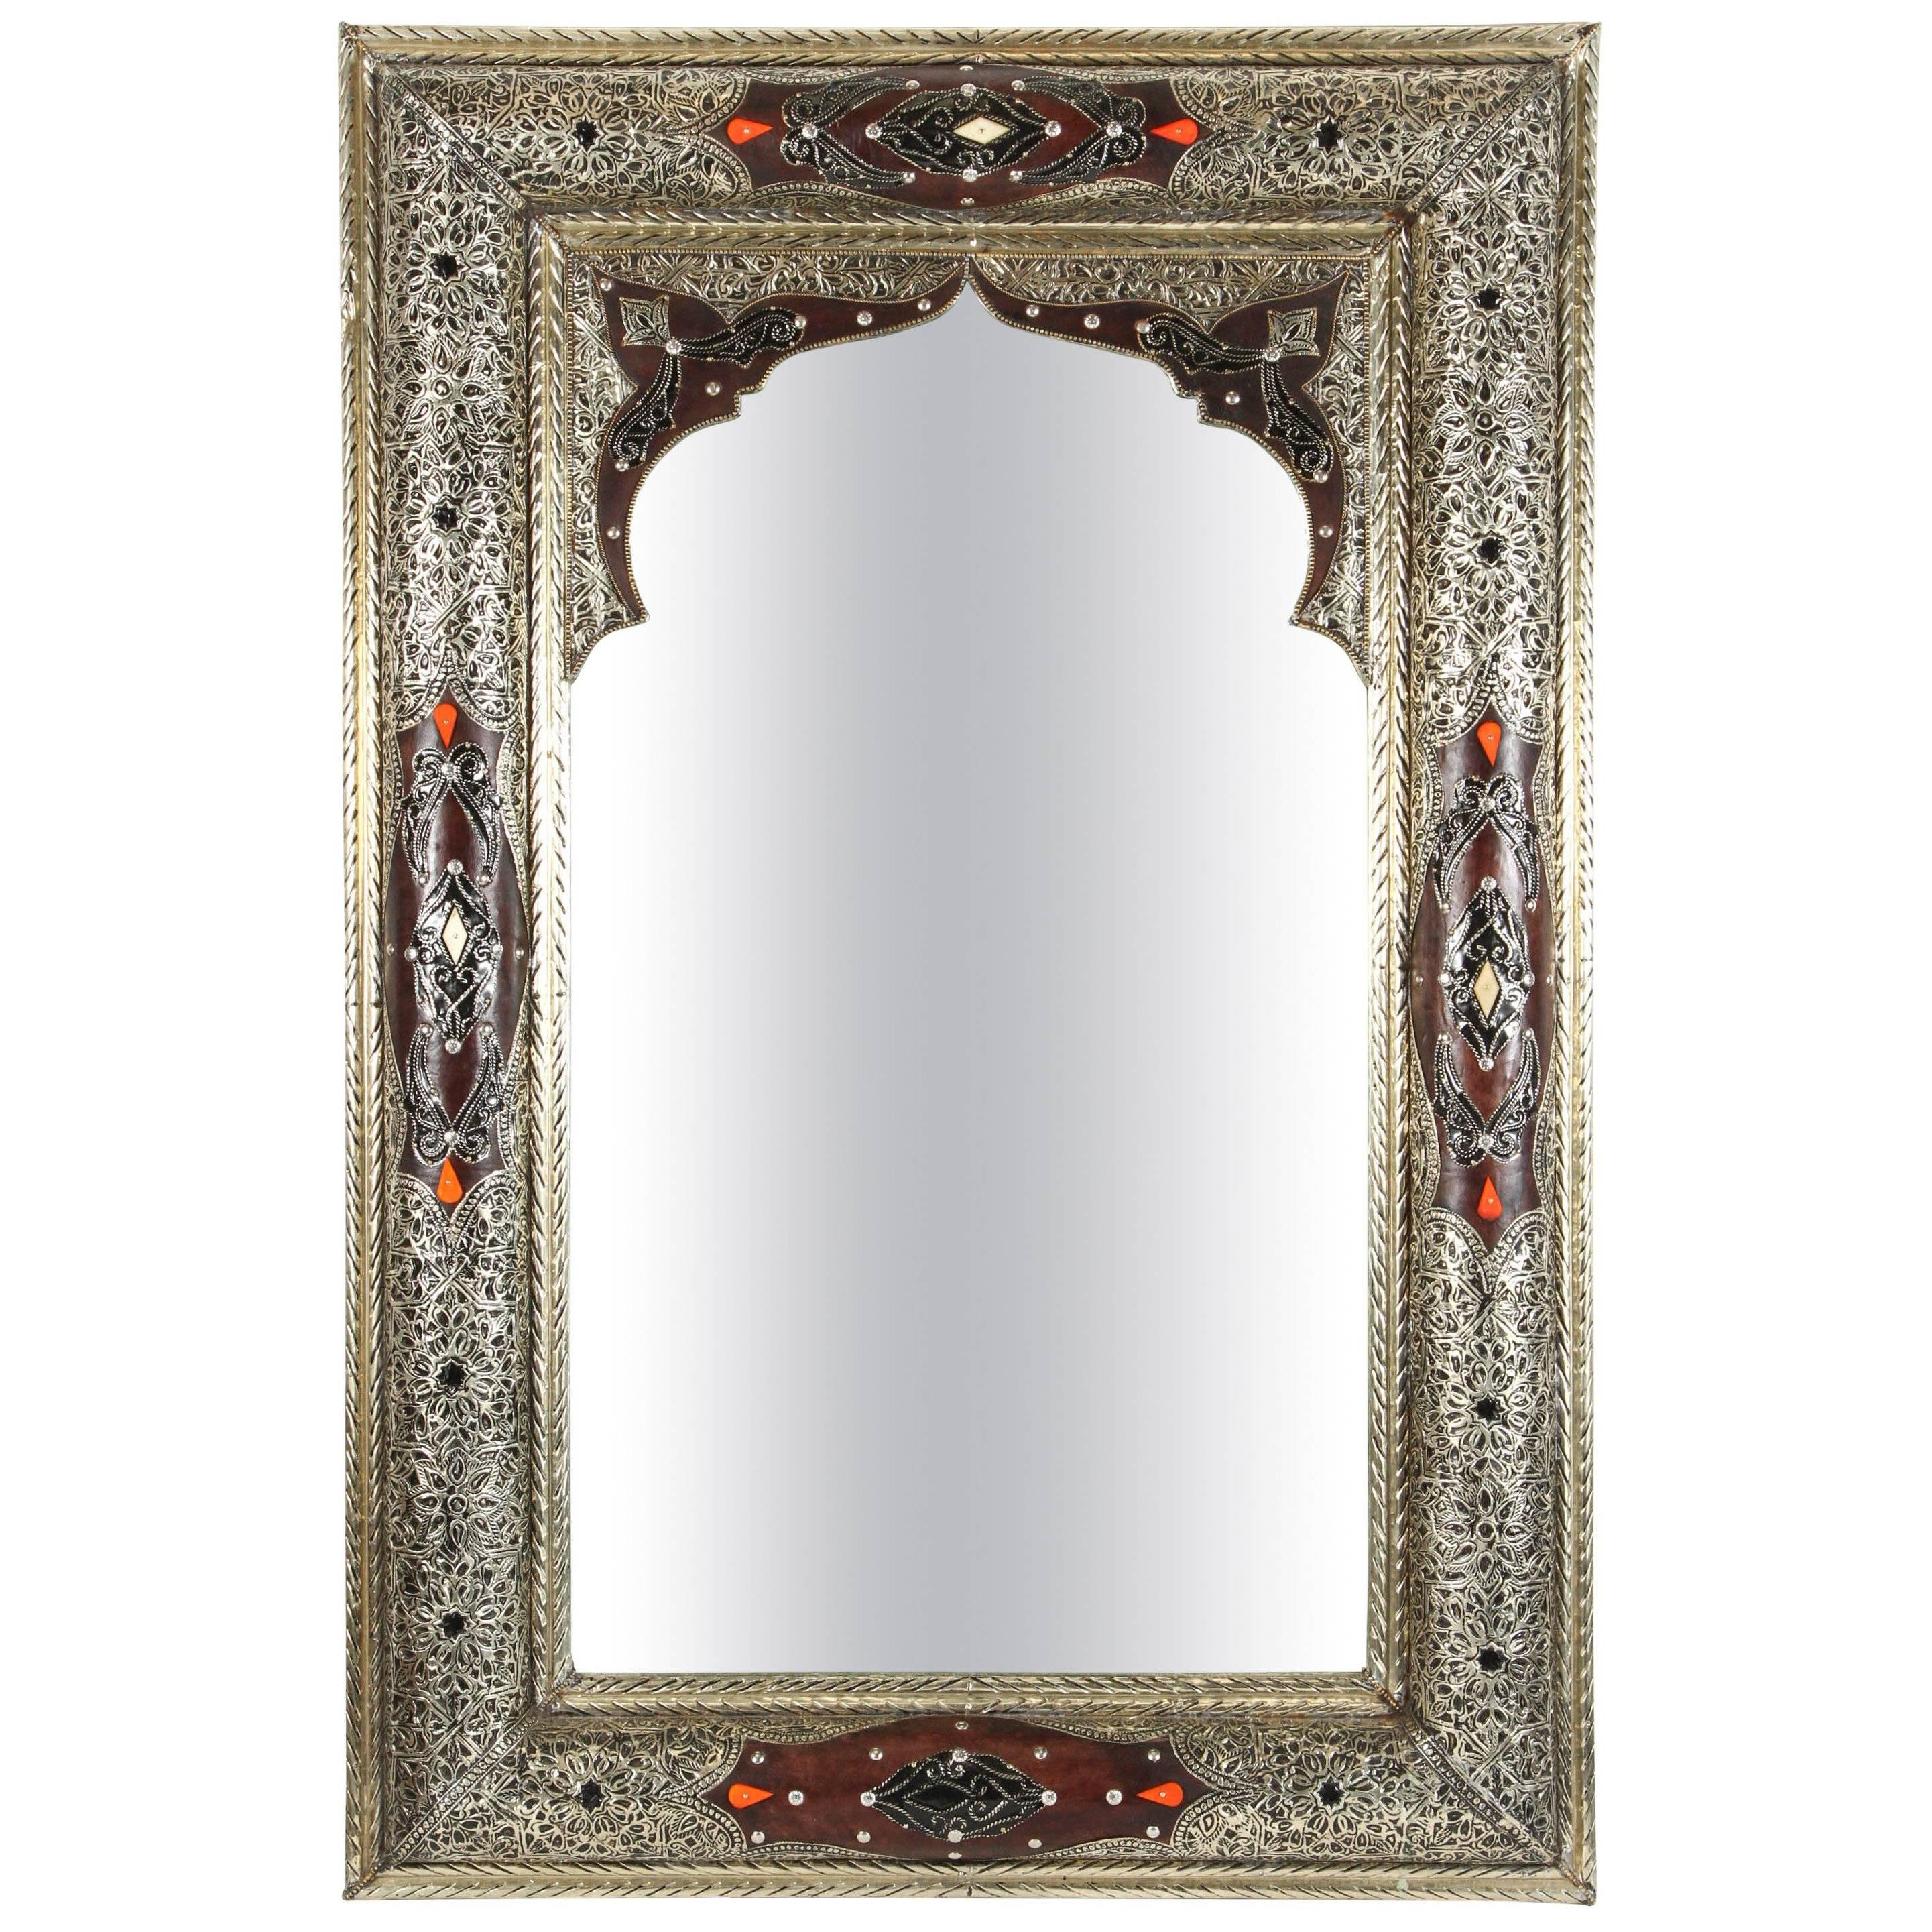 Moroccan Mirror Silvered Metal and Leather Wrapped